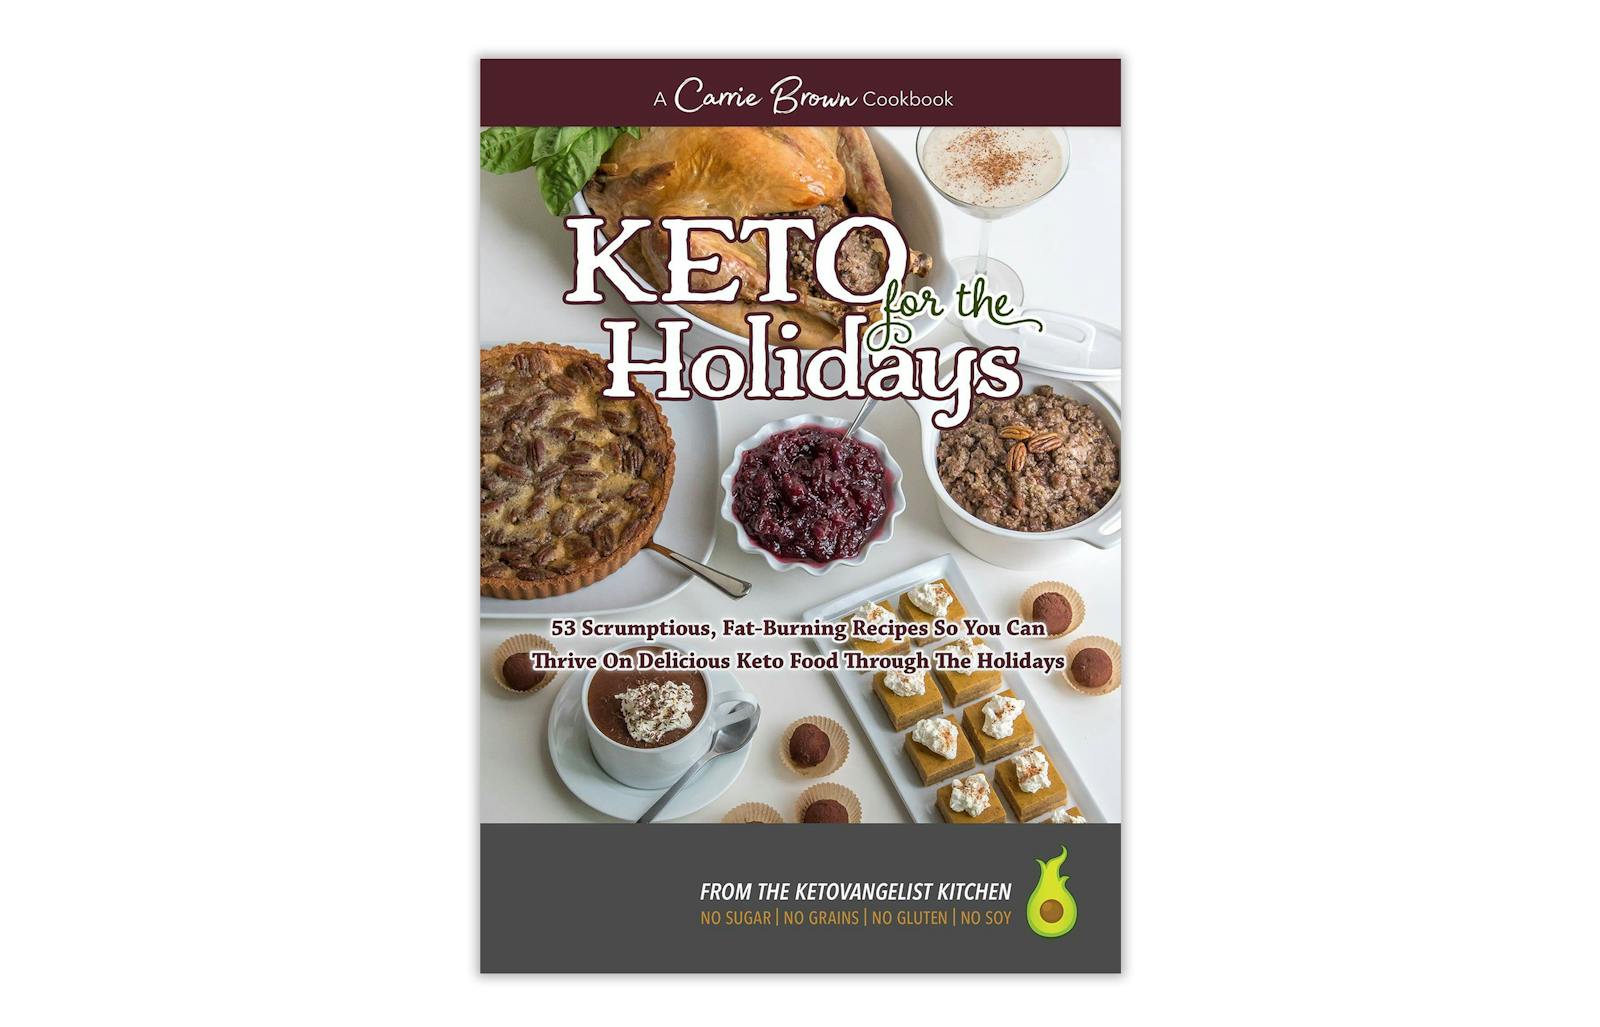 Keto for the Holidays' book review - Diet Doctor